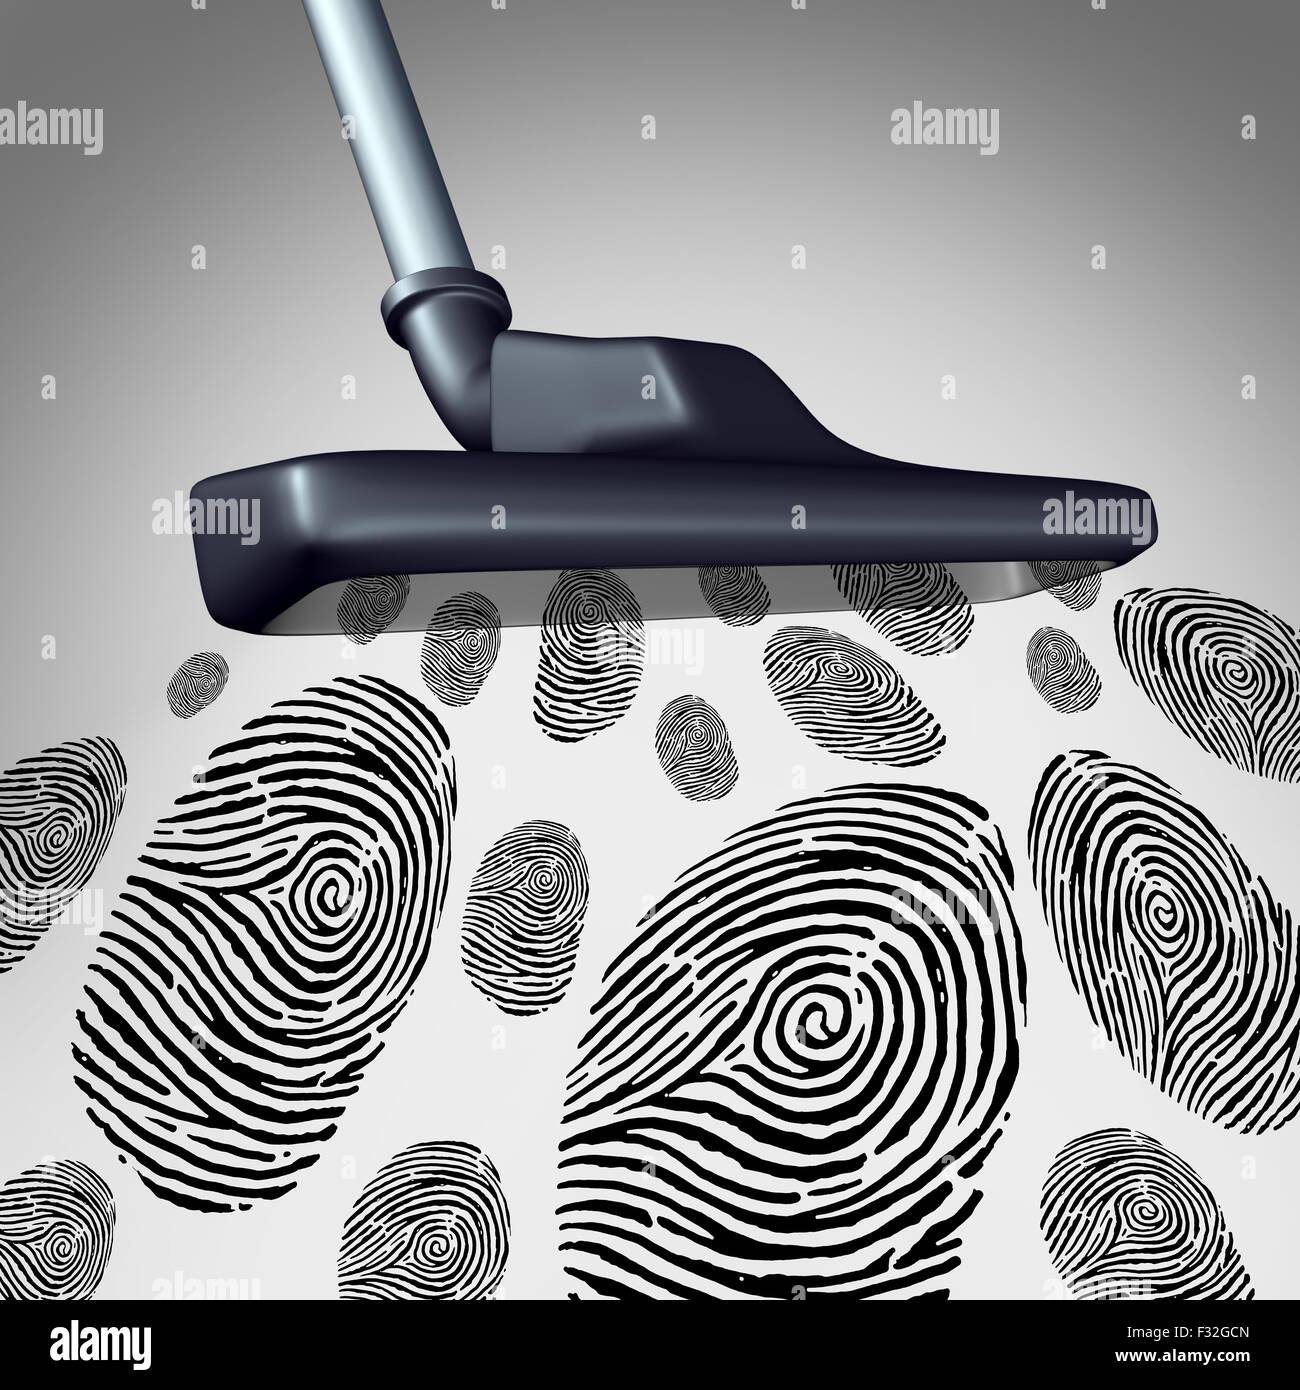 Collecting customer identity and individual data mining concept as a symbol of gathering personal information as a vacuum cleaner sucking and retrieving a group of finger prints or fingerprint as a security technology metaphor. Stock Photo